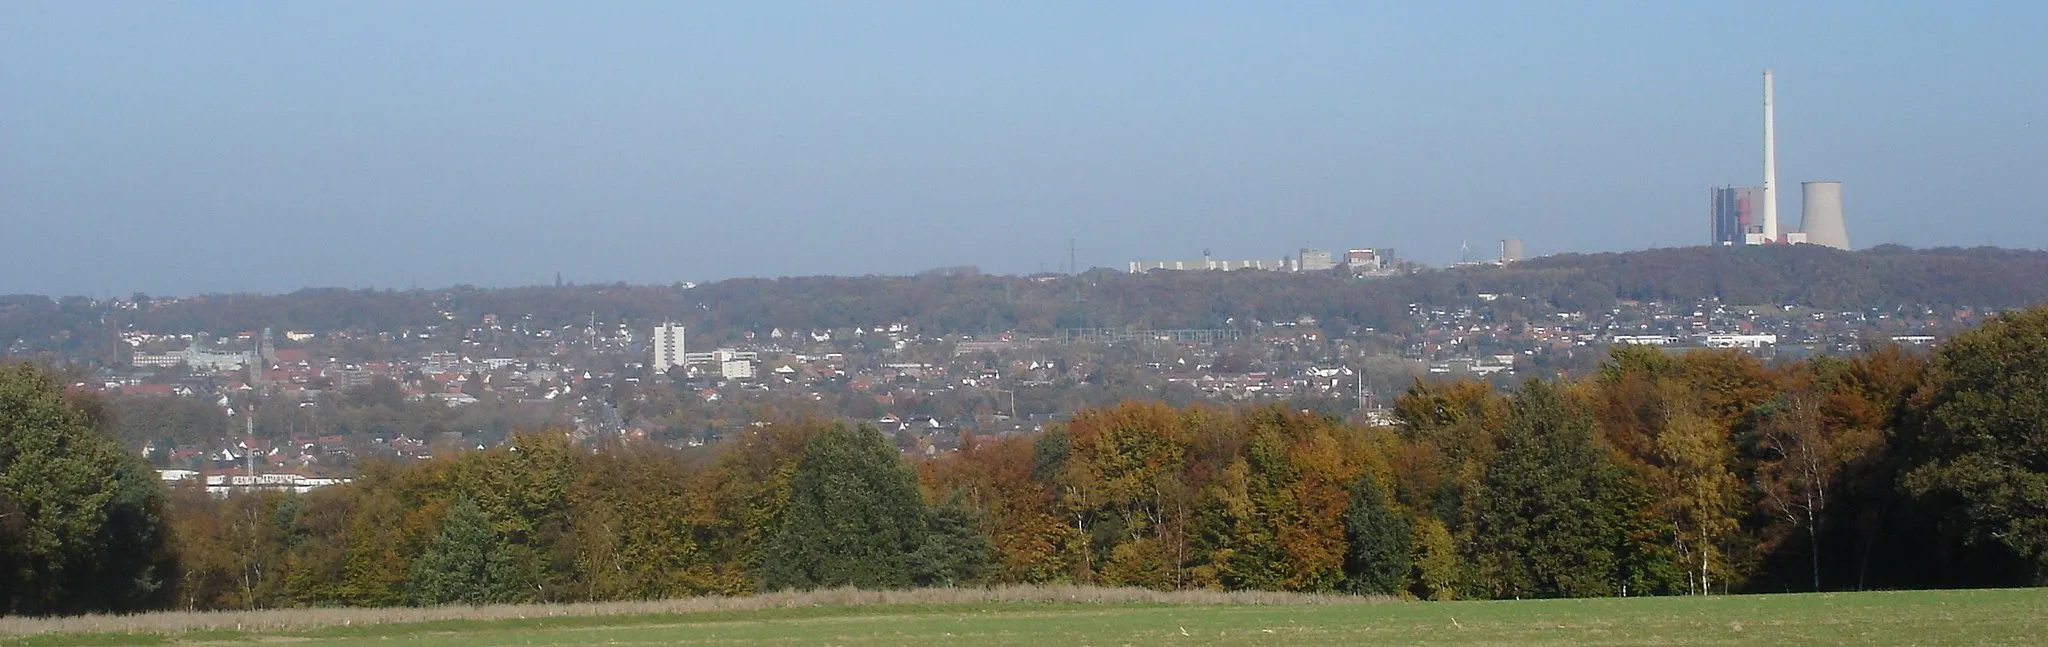 Photo showing: City-panorama of the city of Ibbenbüren, taken from the Dörenther Berg